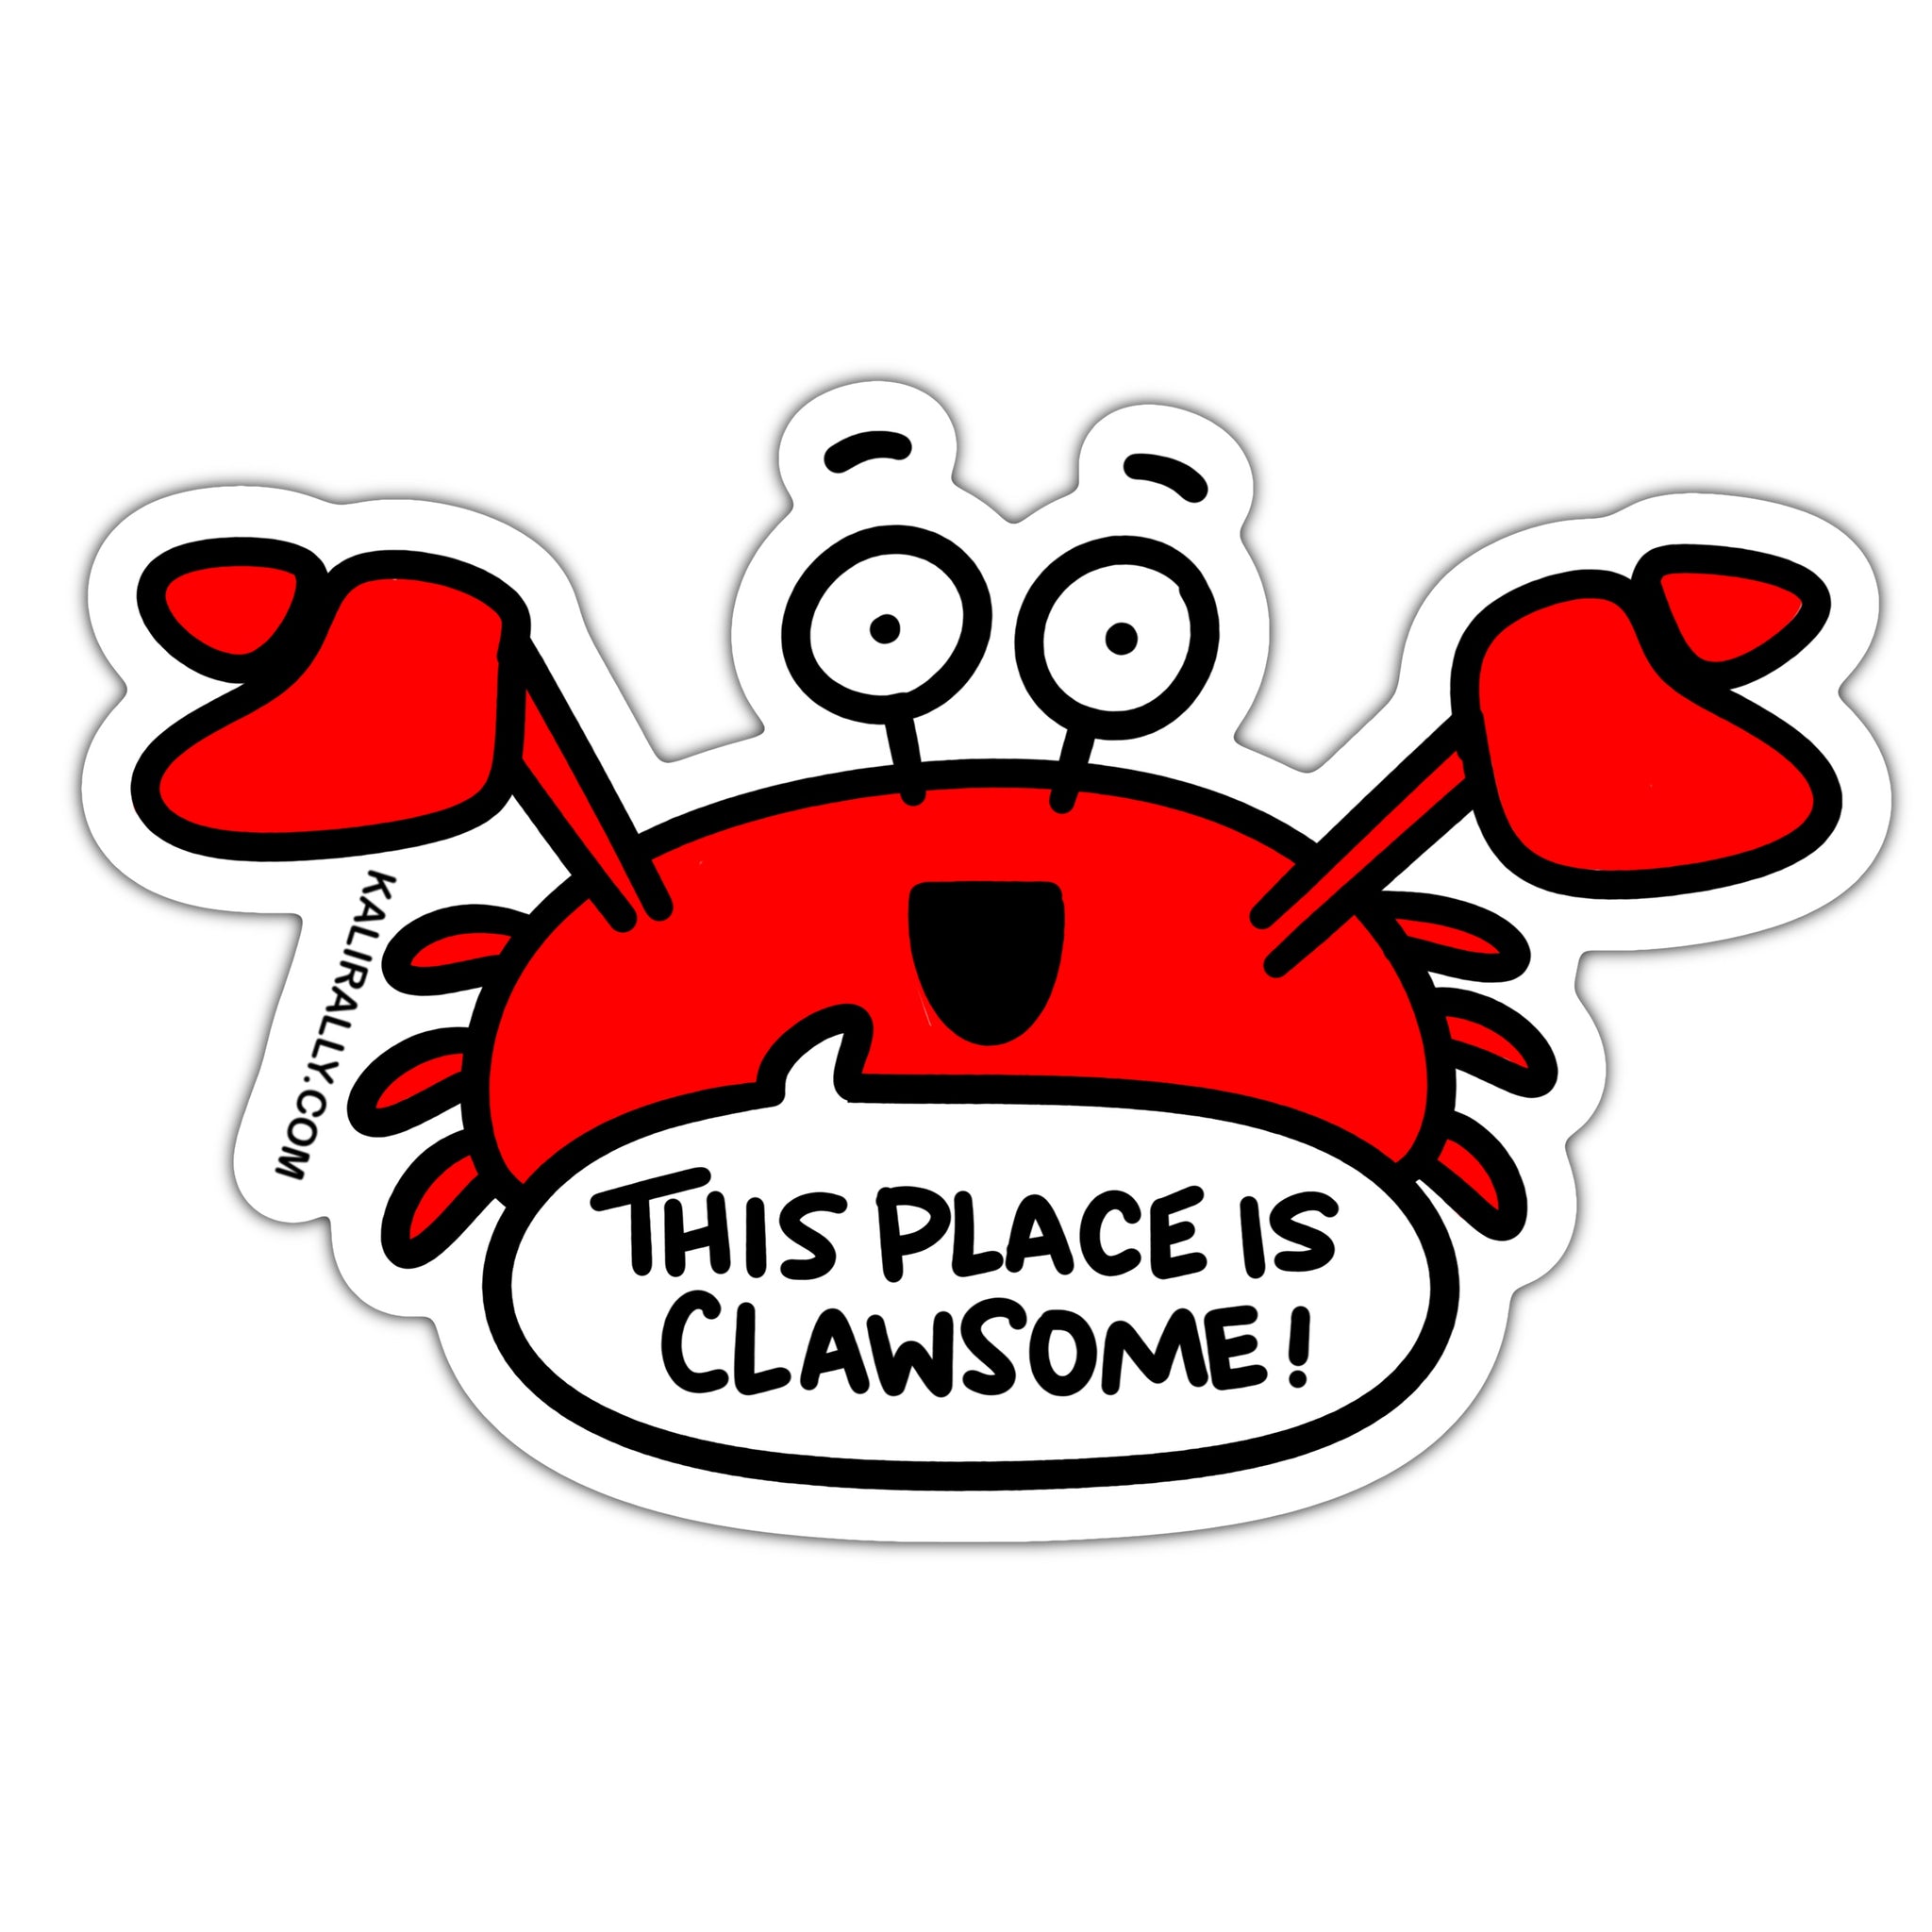 This place is clawsome beach sticker, funny crab sticker, punny sticker for beach cooler, waterproof vinyl sticker